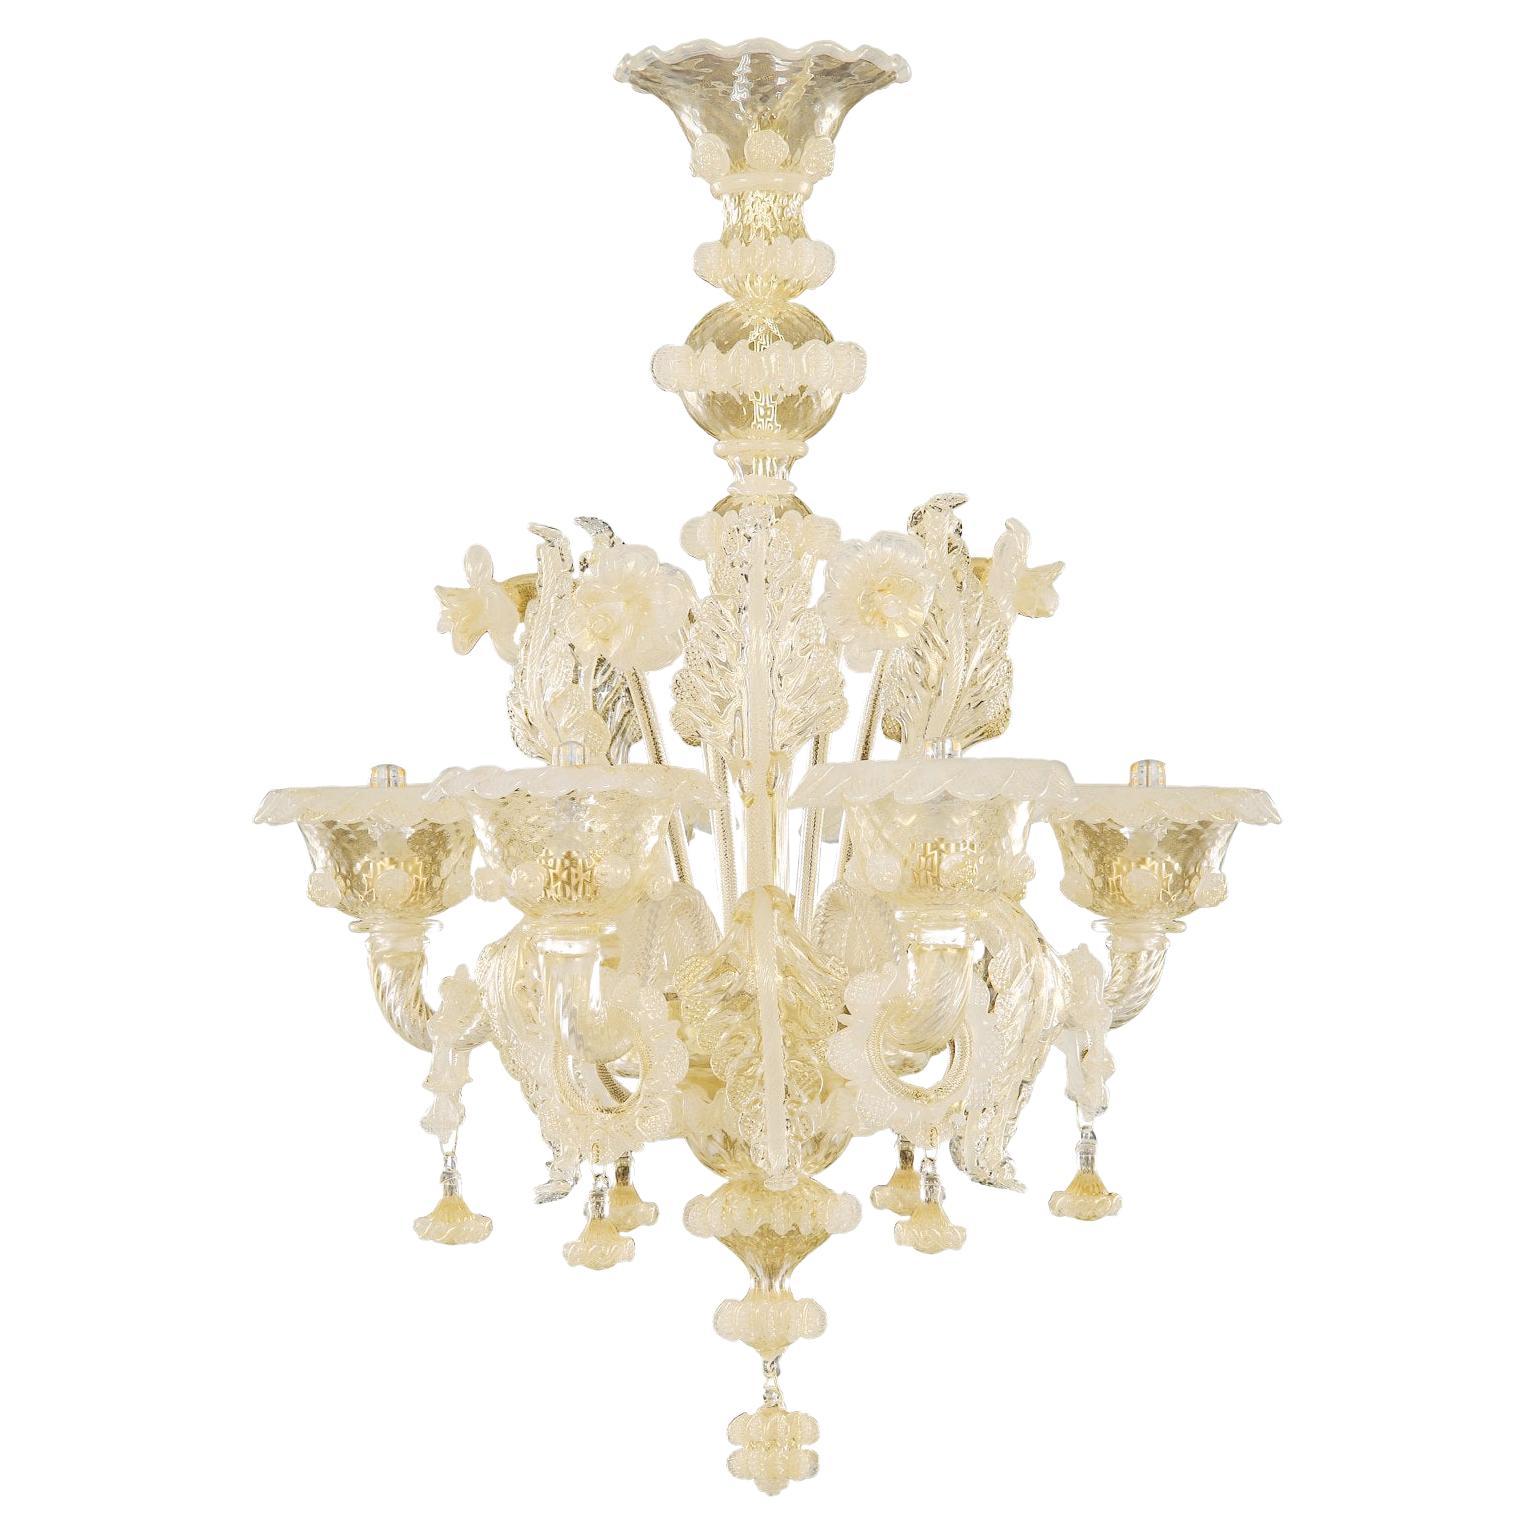 Artistic Rich Chandelier, 6 Arms Gold Murano Glass silk details by Multiforme For Sale